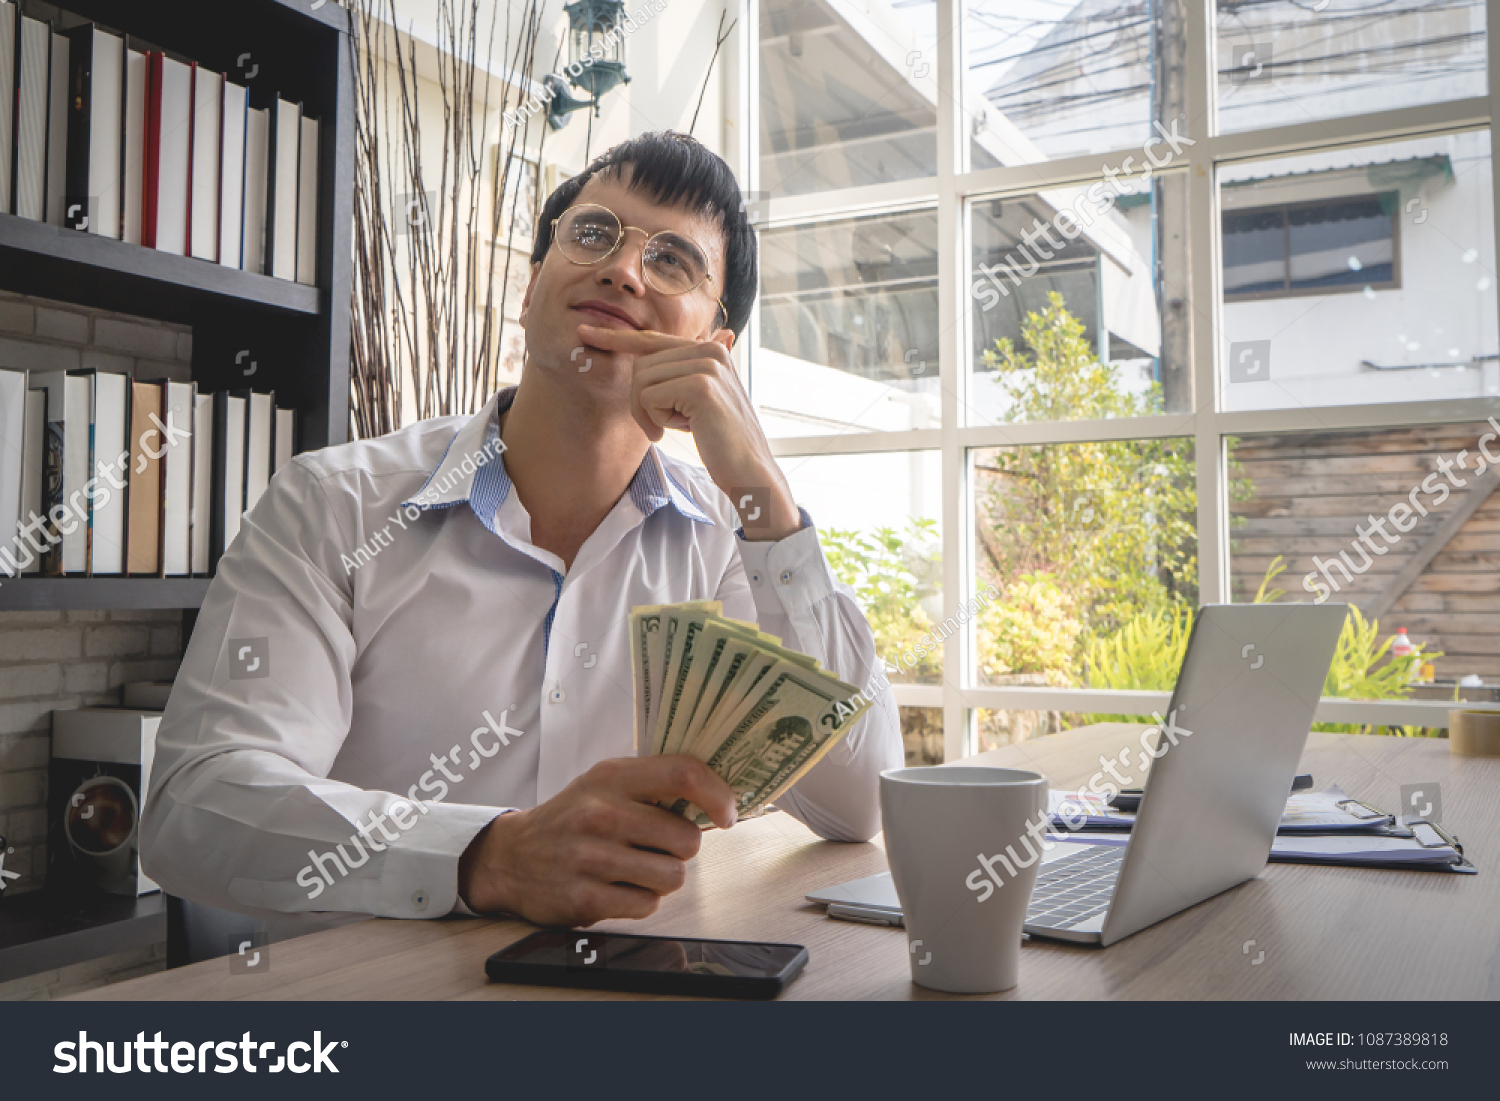 Business man is dreaming of more money working online #1087389818